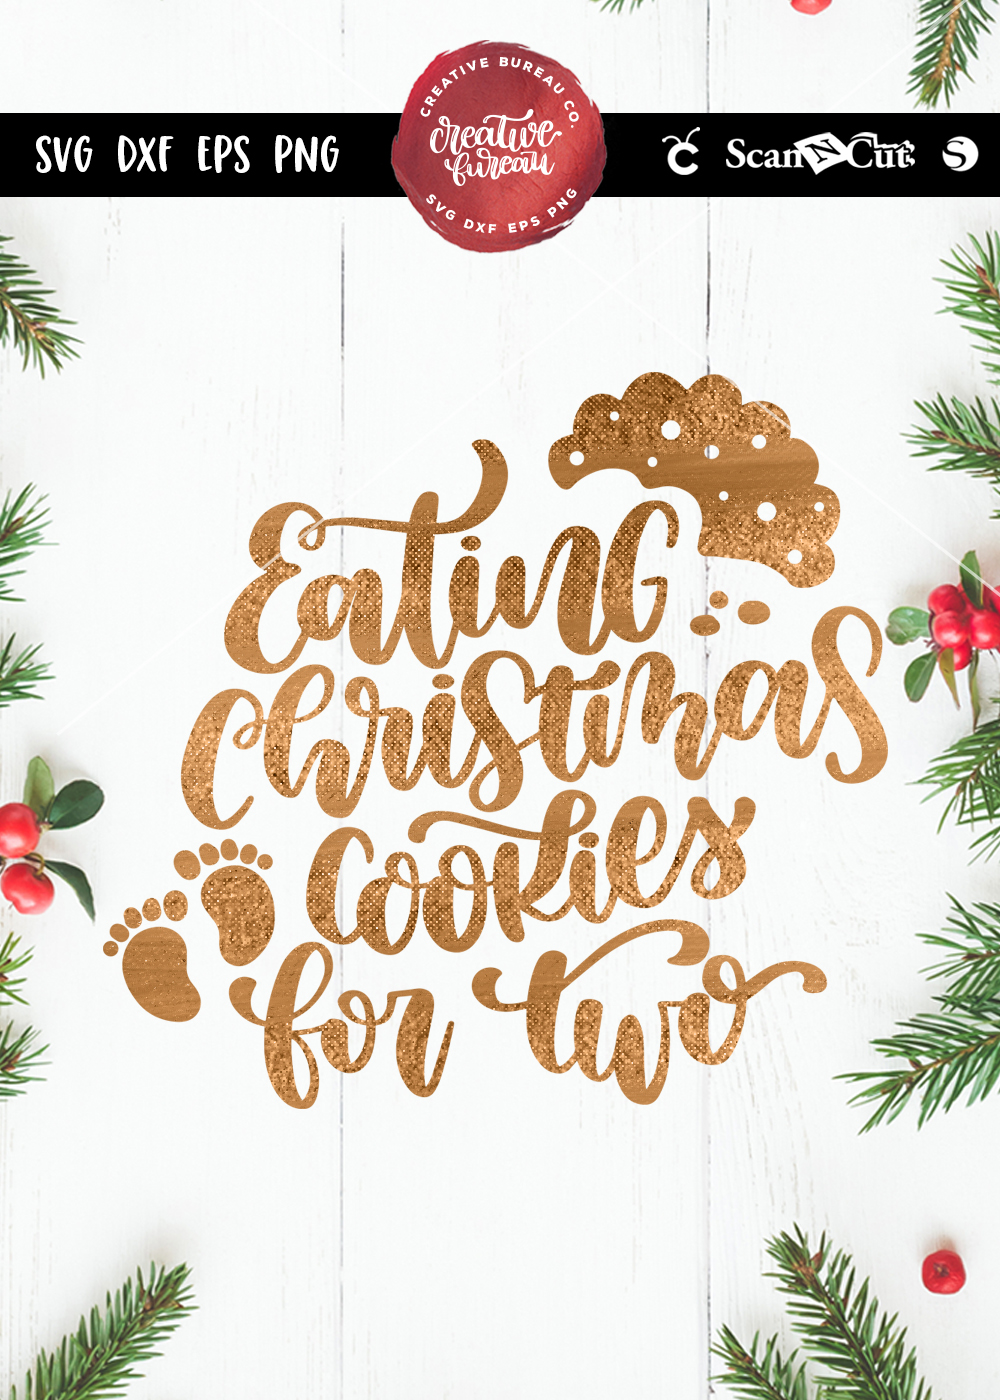 Download Eating Christmas Cookies For Two SVG, Christmas SVG DXF ...